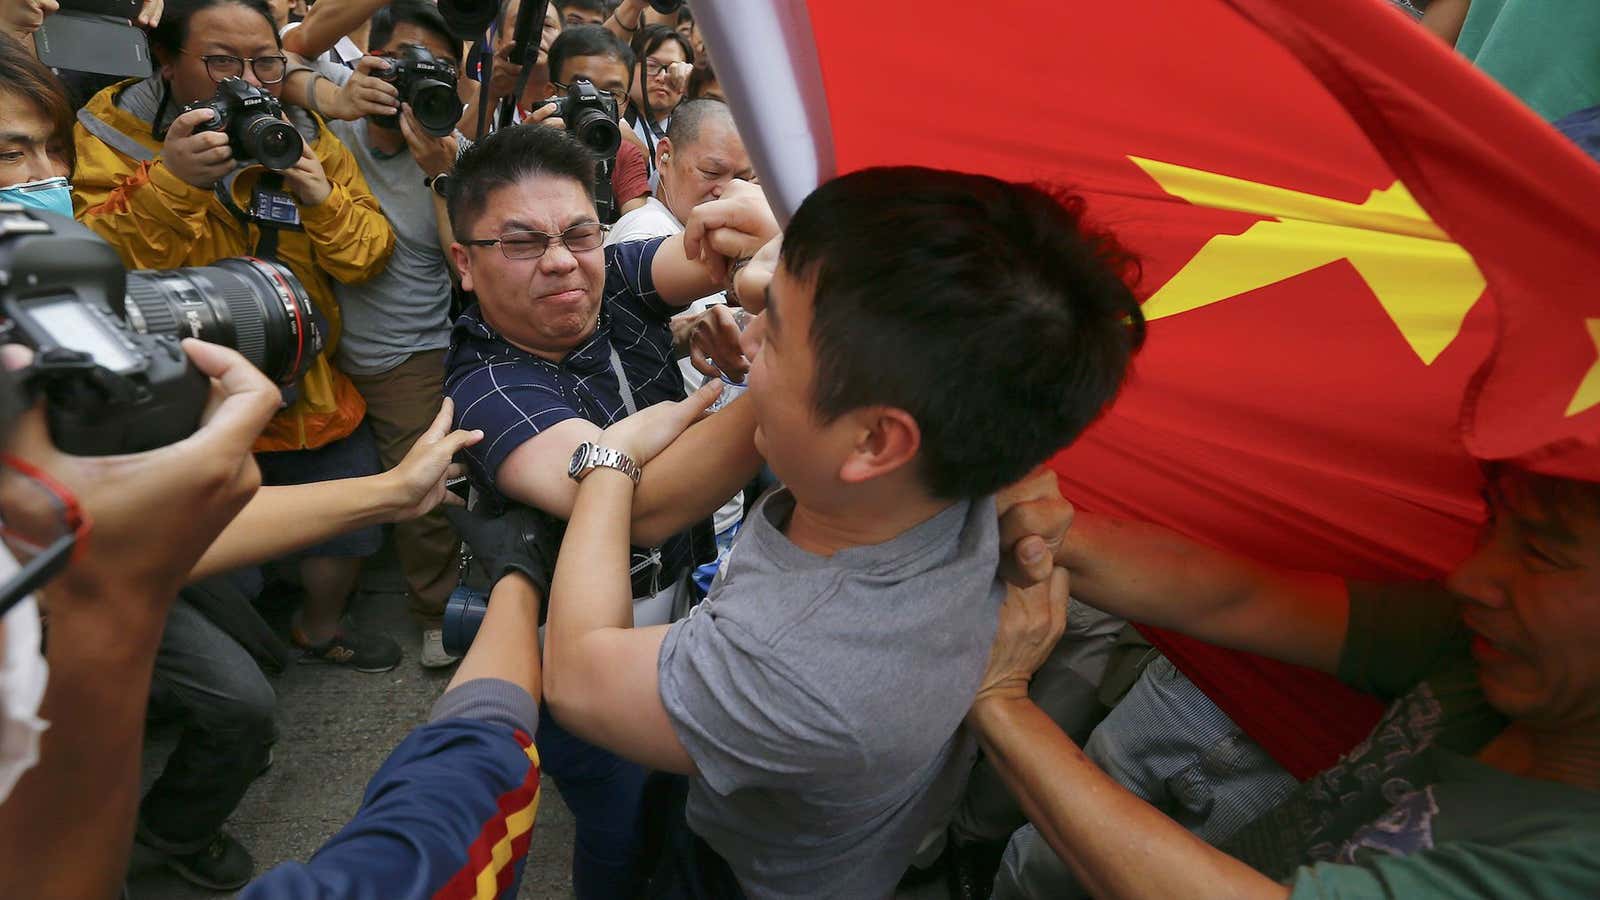 Pro-democracy demonstrators scuffle with a man holding a Chinese flag in Mong Kok.